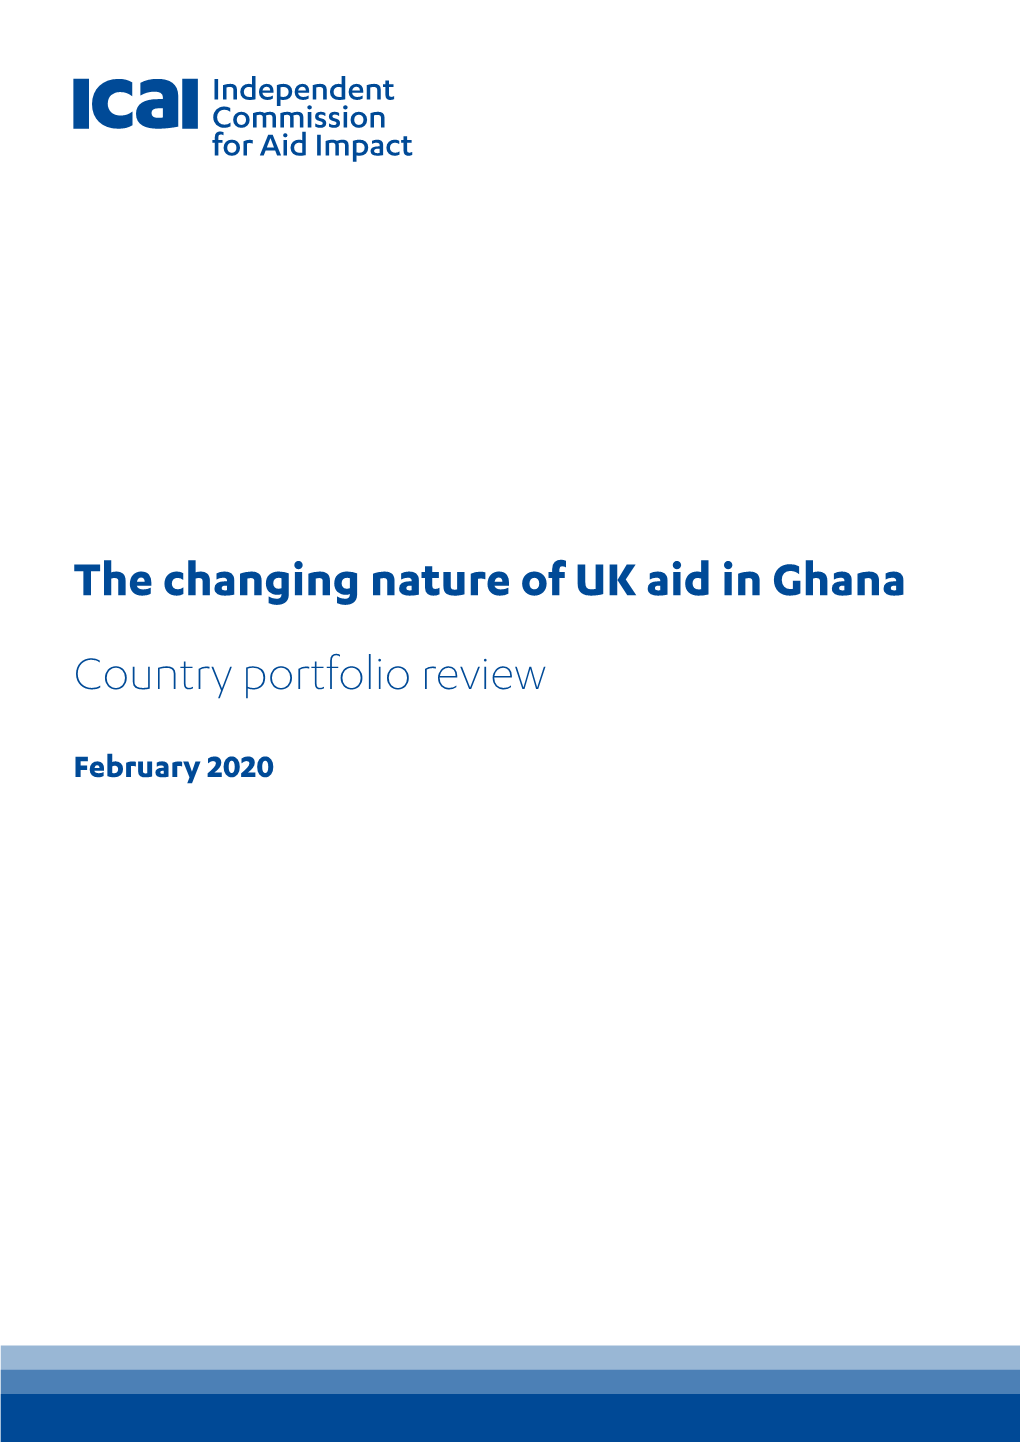 The Changing Nature of UK Aid in Ghana Country Portfolio Review